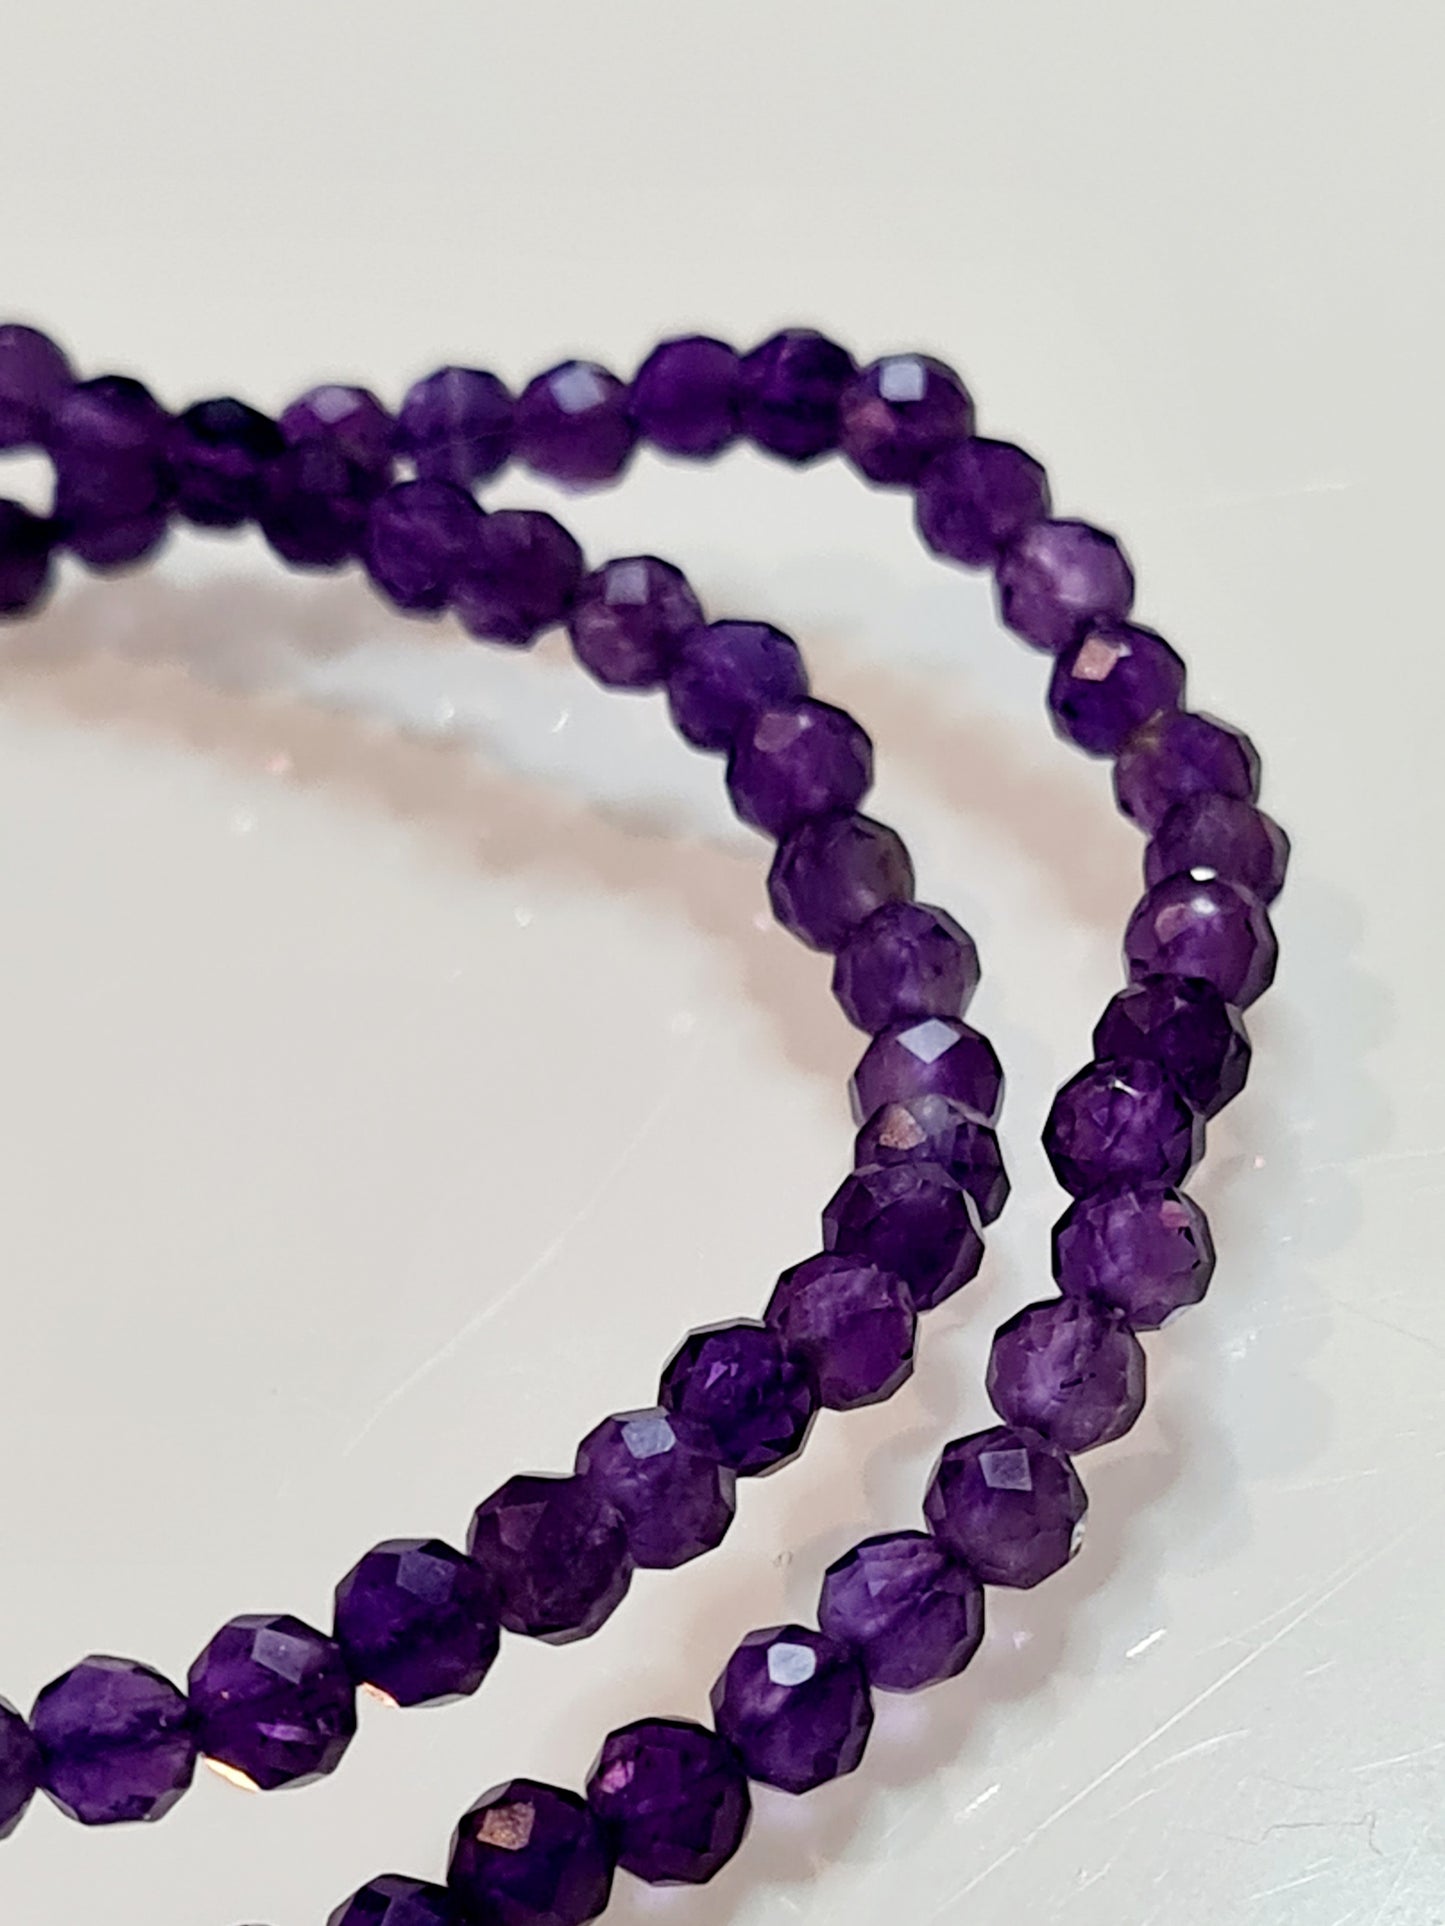 Two 4mm faceted dark amethyst bead bracelet, elasticated, on white background